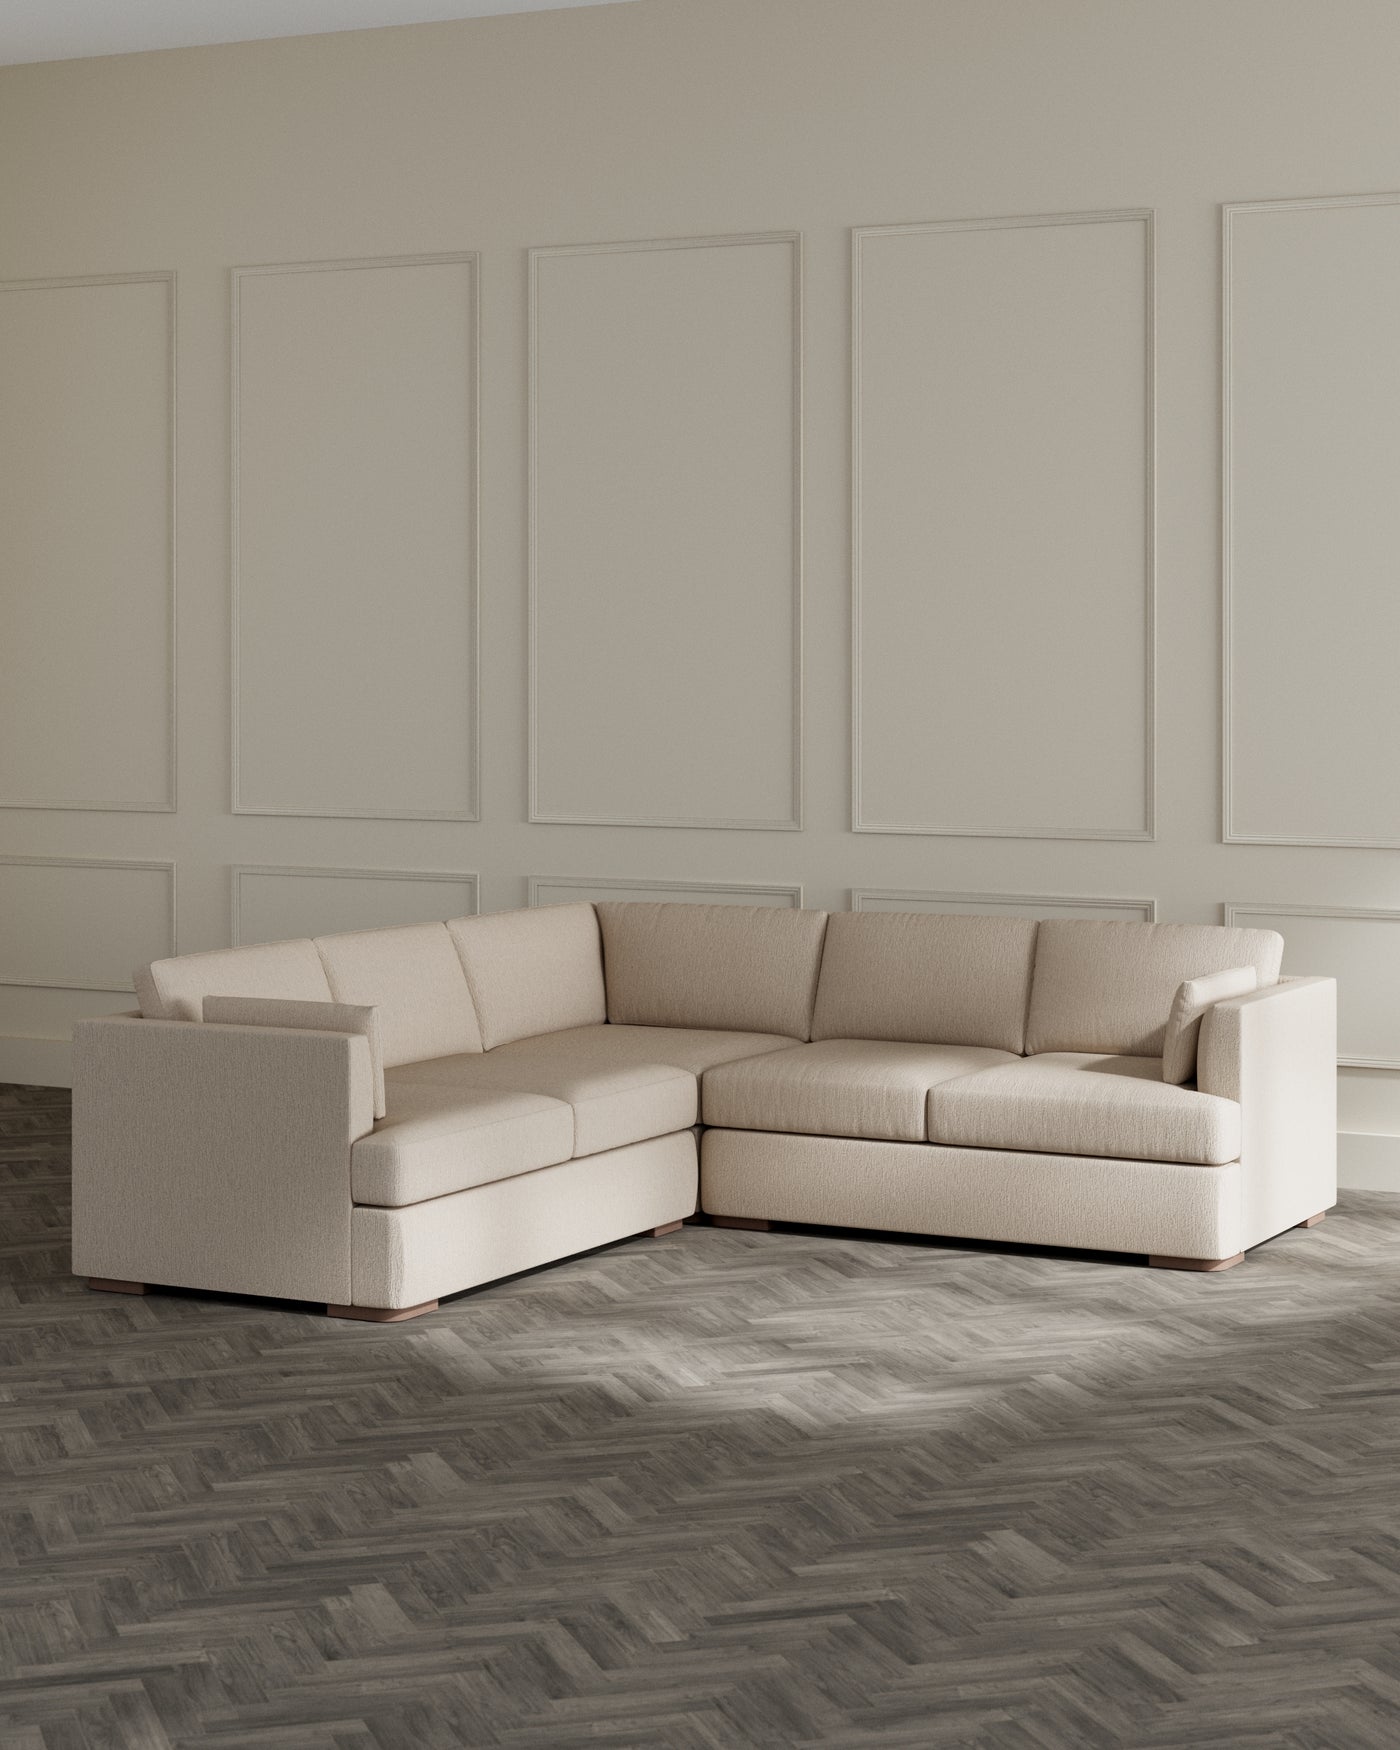 Modern beige L-shaped sectional sofa with clean lines and plush cushions, set against a panelled beige wall on a dark herringbone-patterned floor.